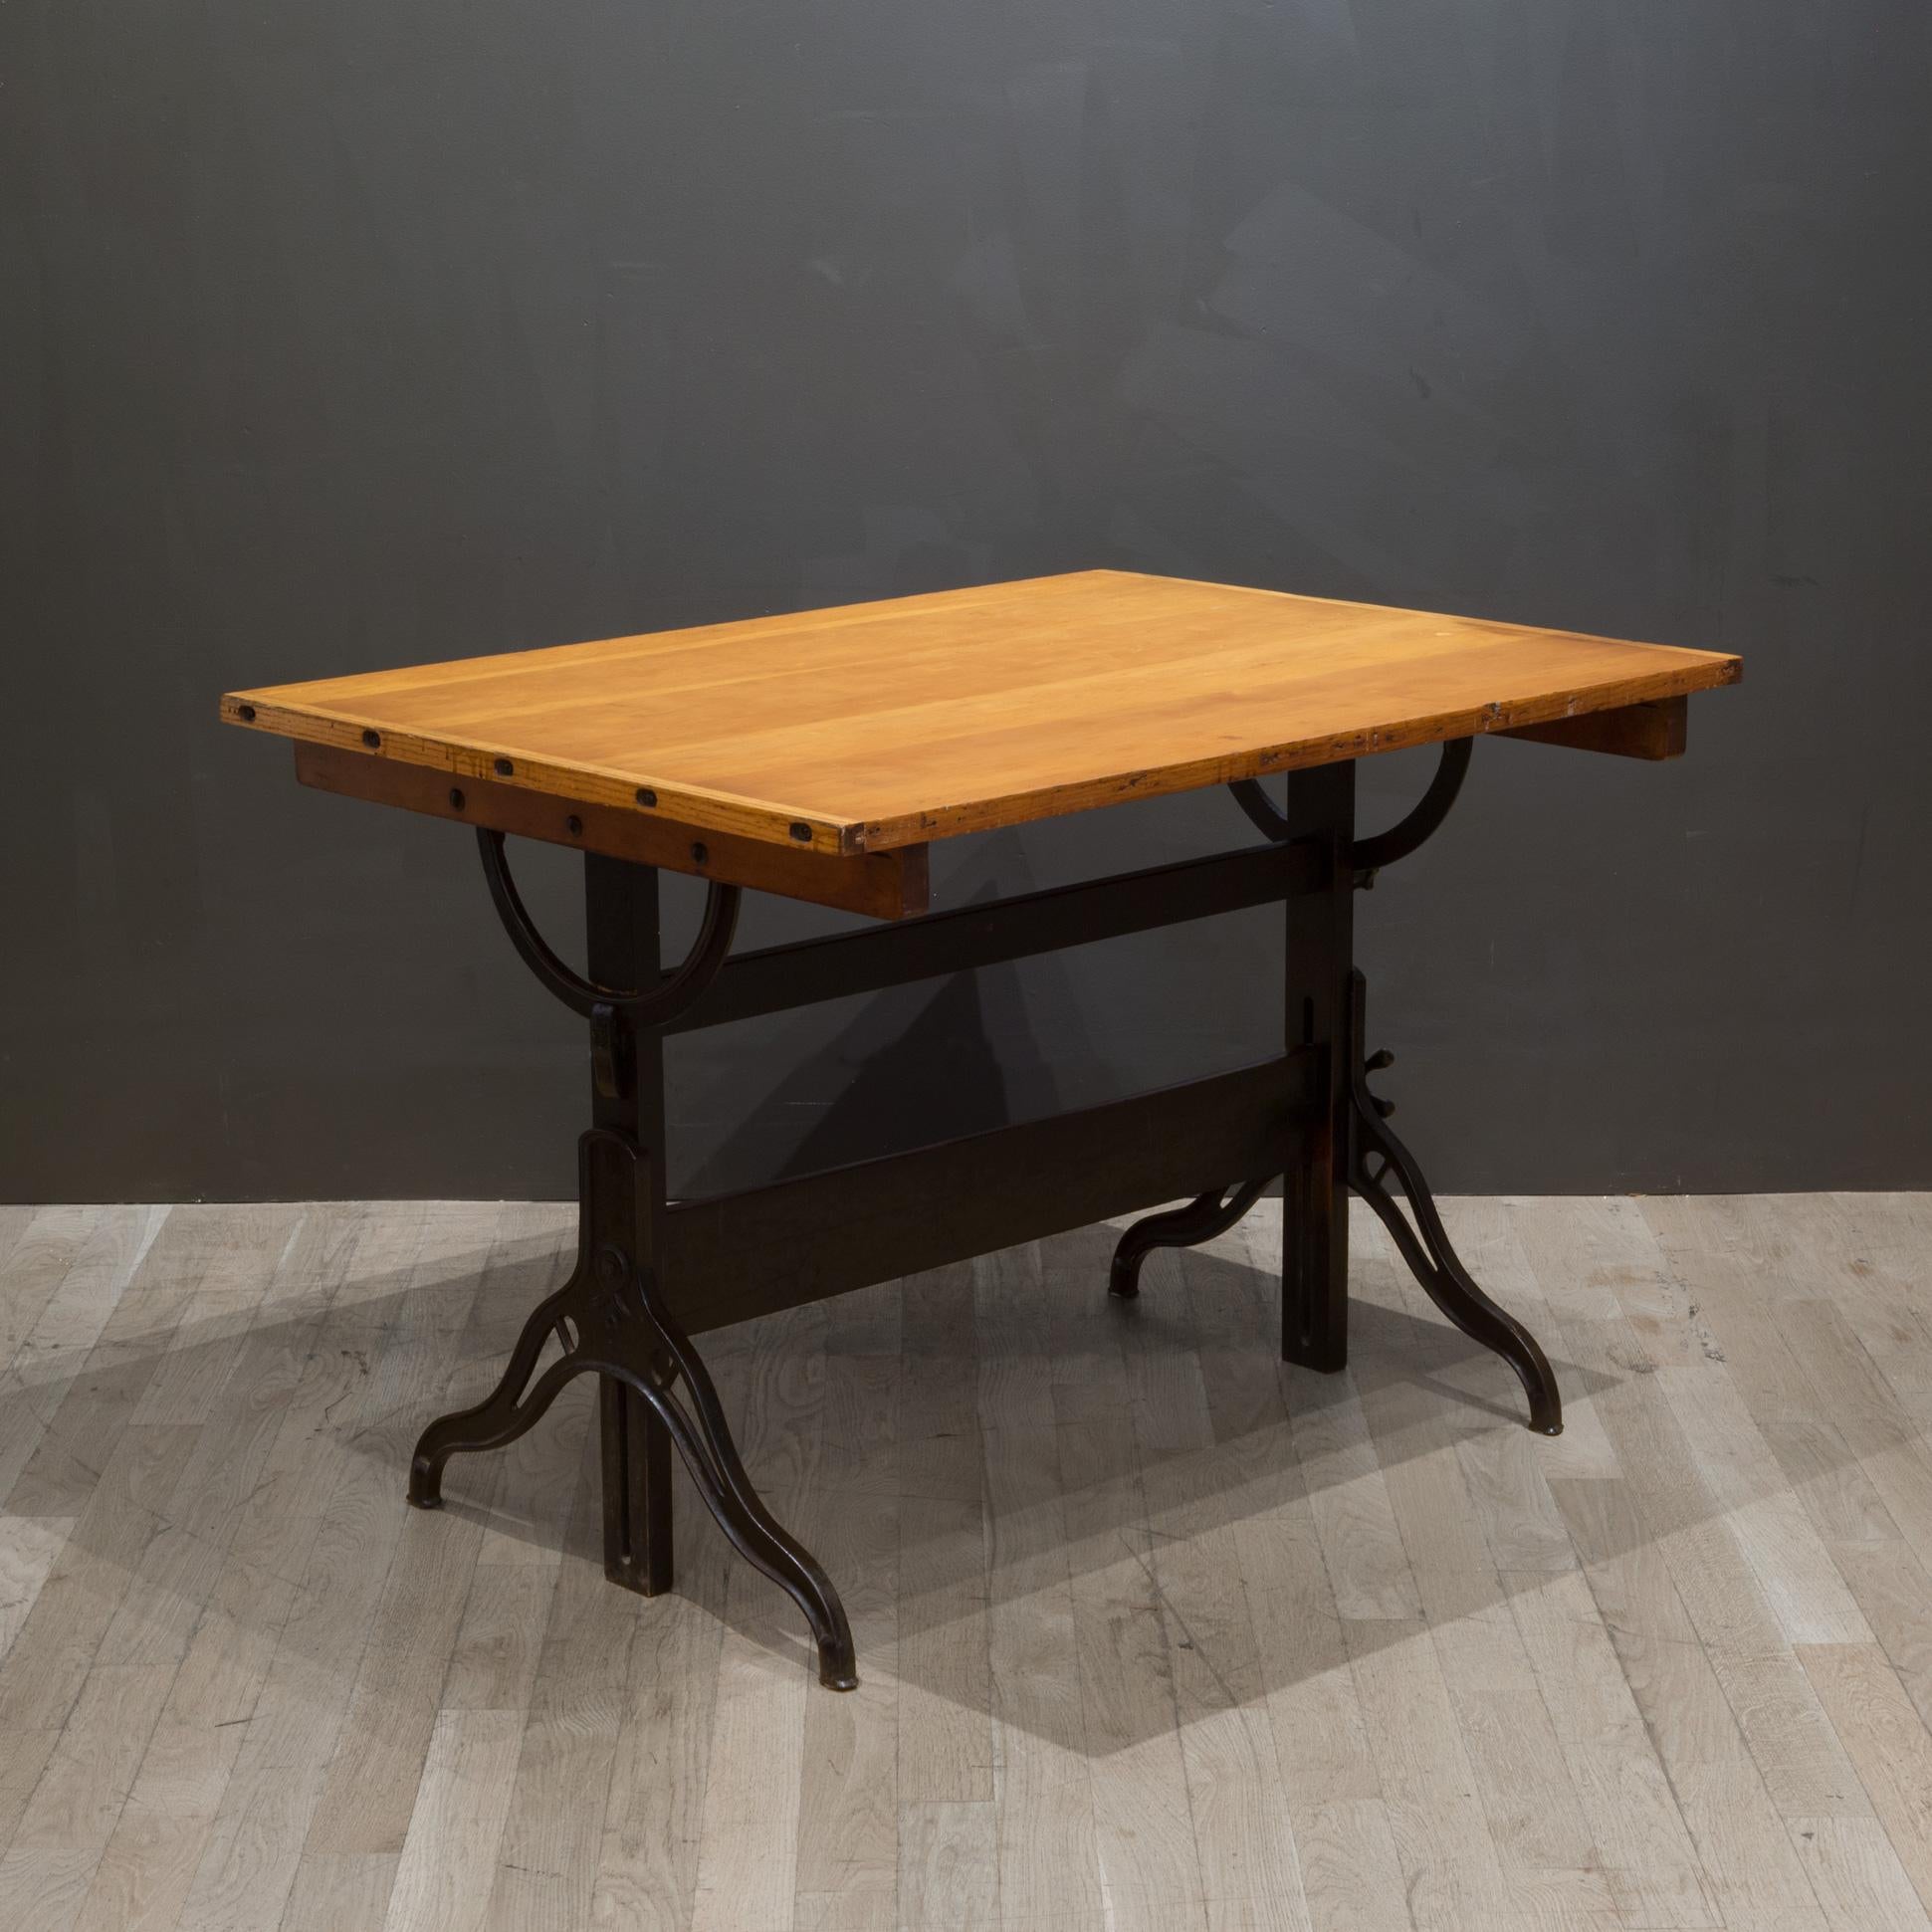 20th Century Antique Hamilton Wood and Cast Iron Drafting Table, C.1930-1940